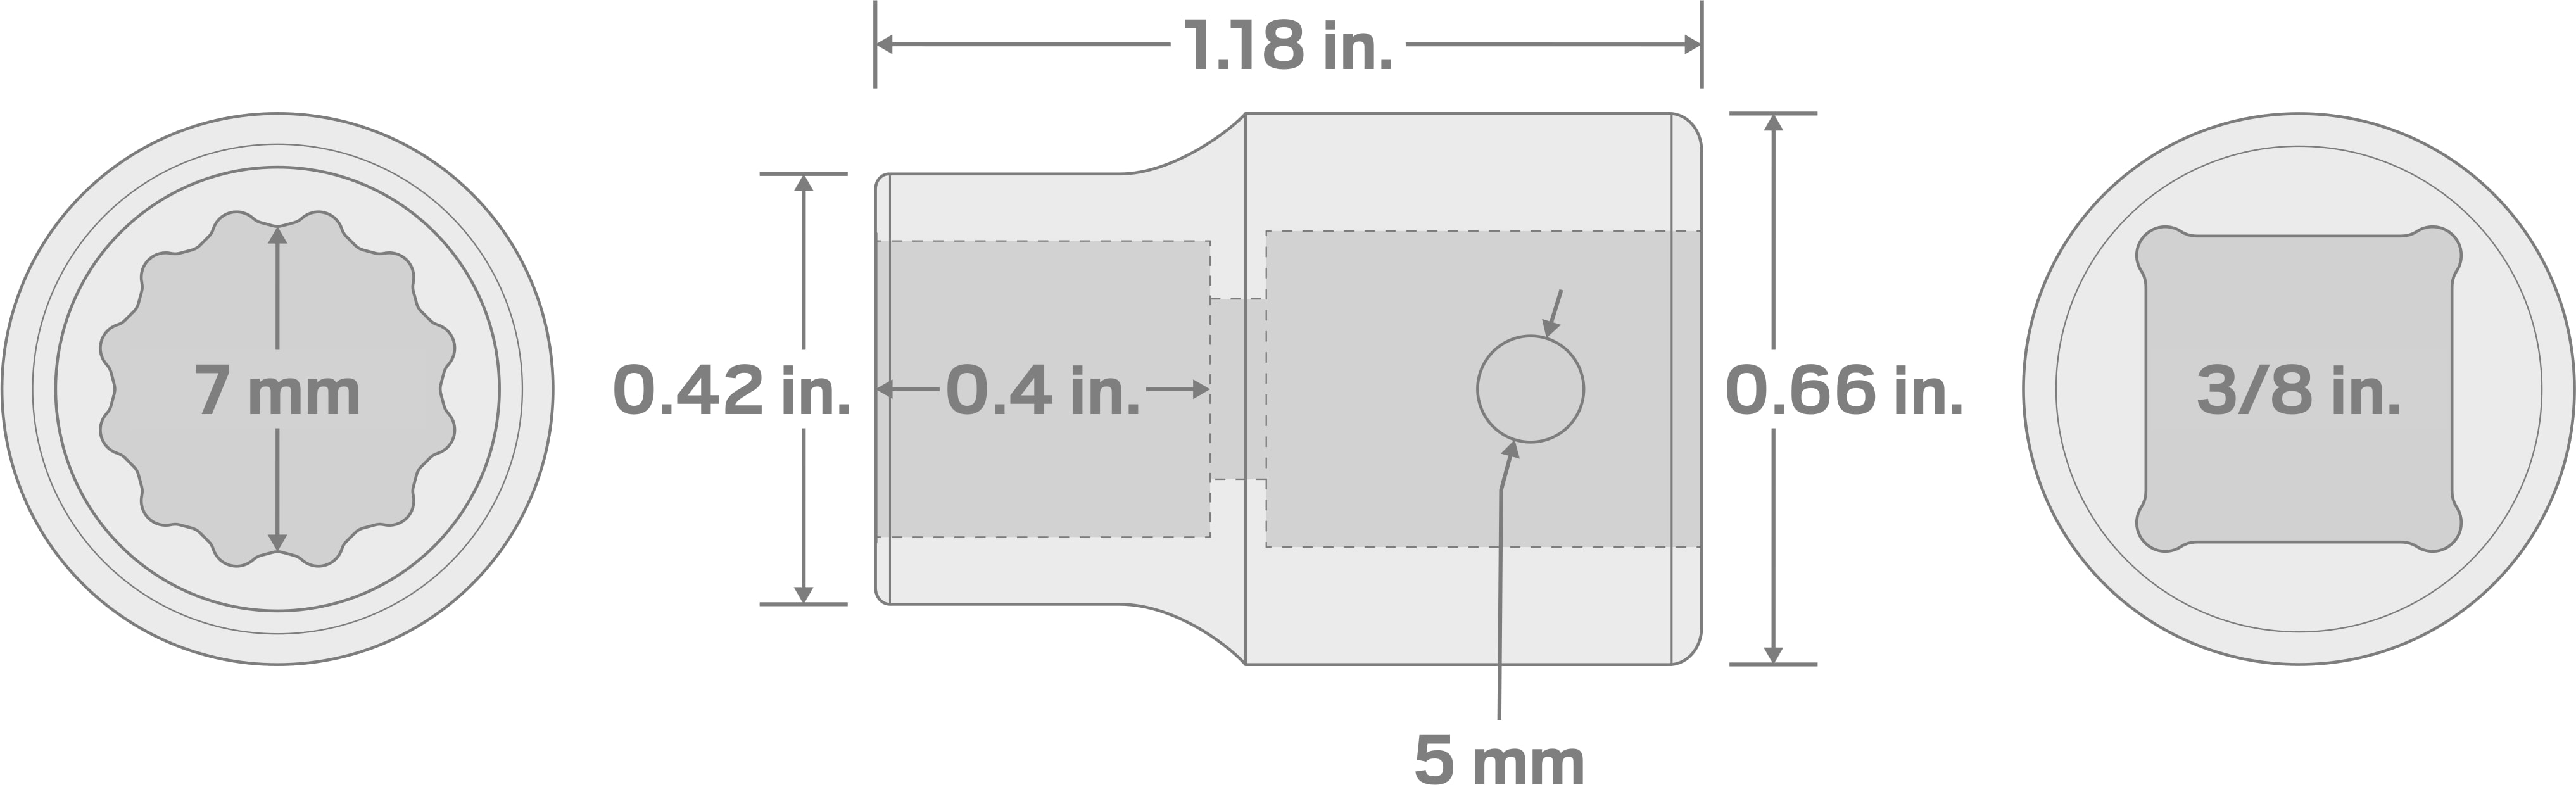 Specs for 3/8 Inch Drive x 7 mm 12-Point Impact Socket